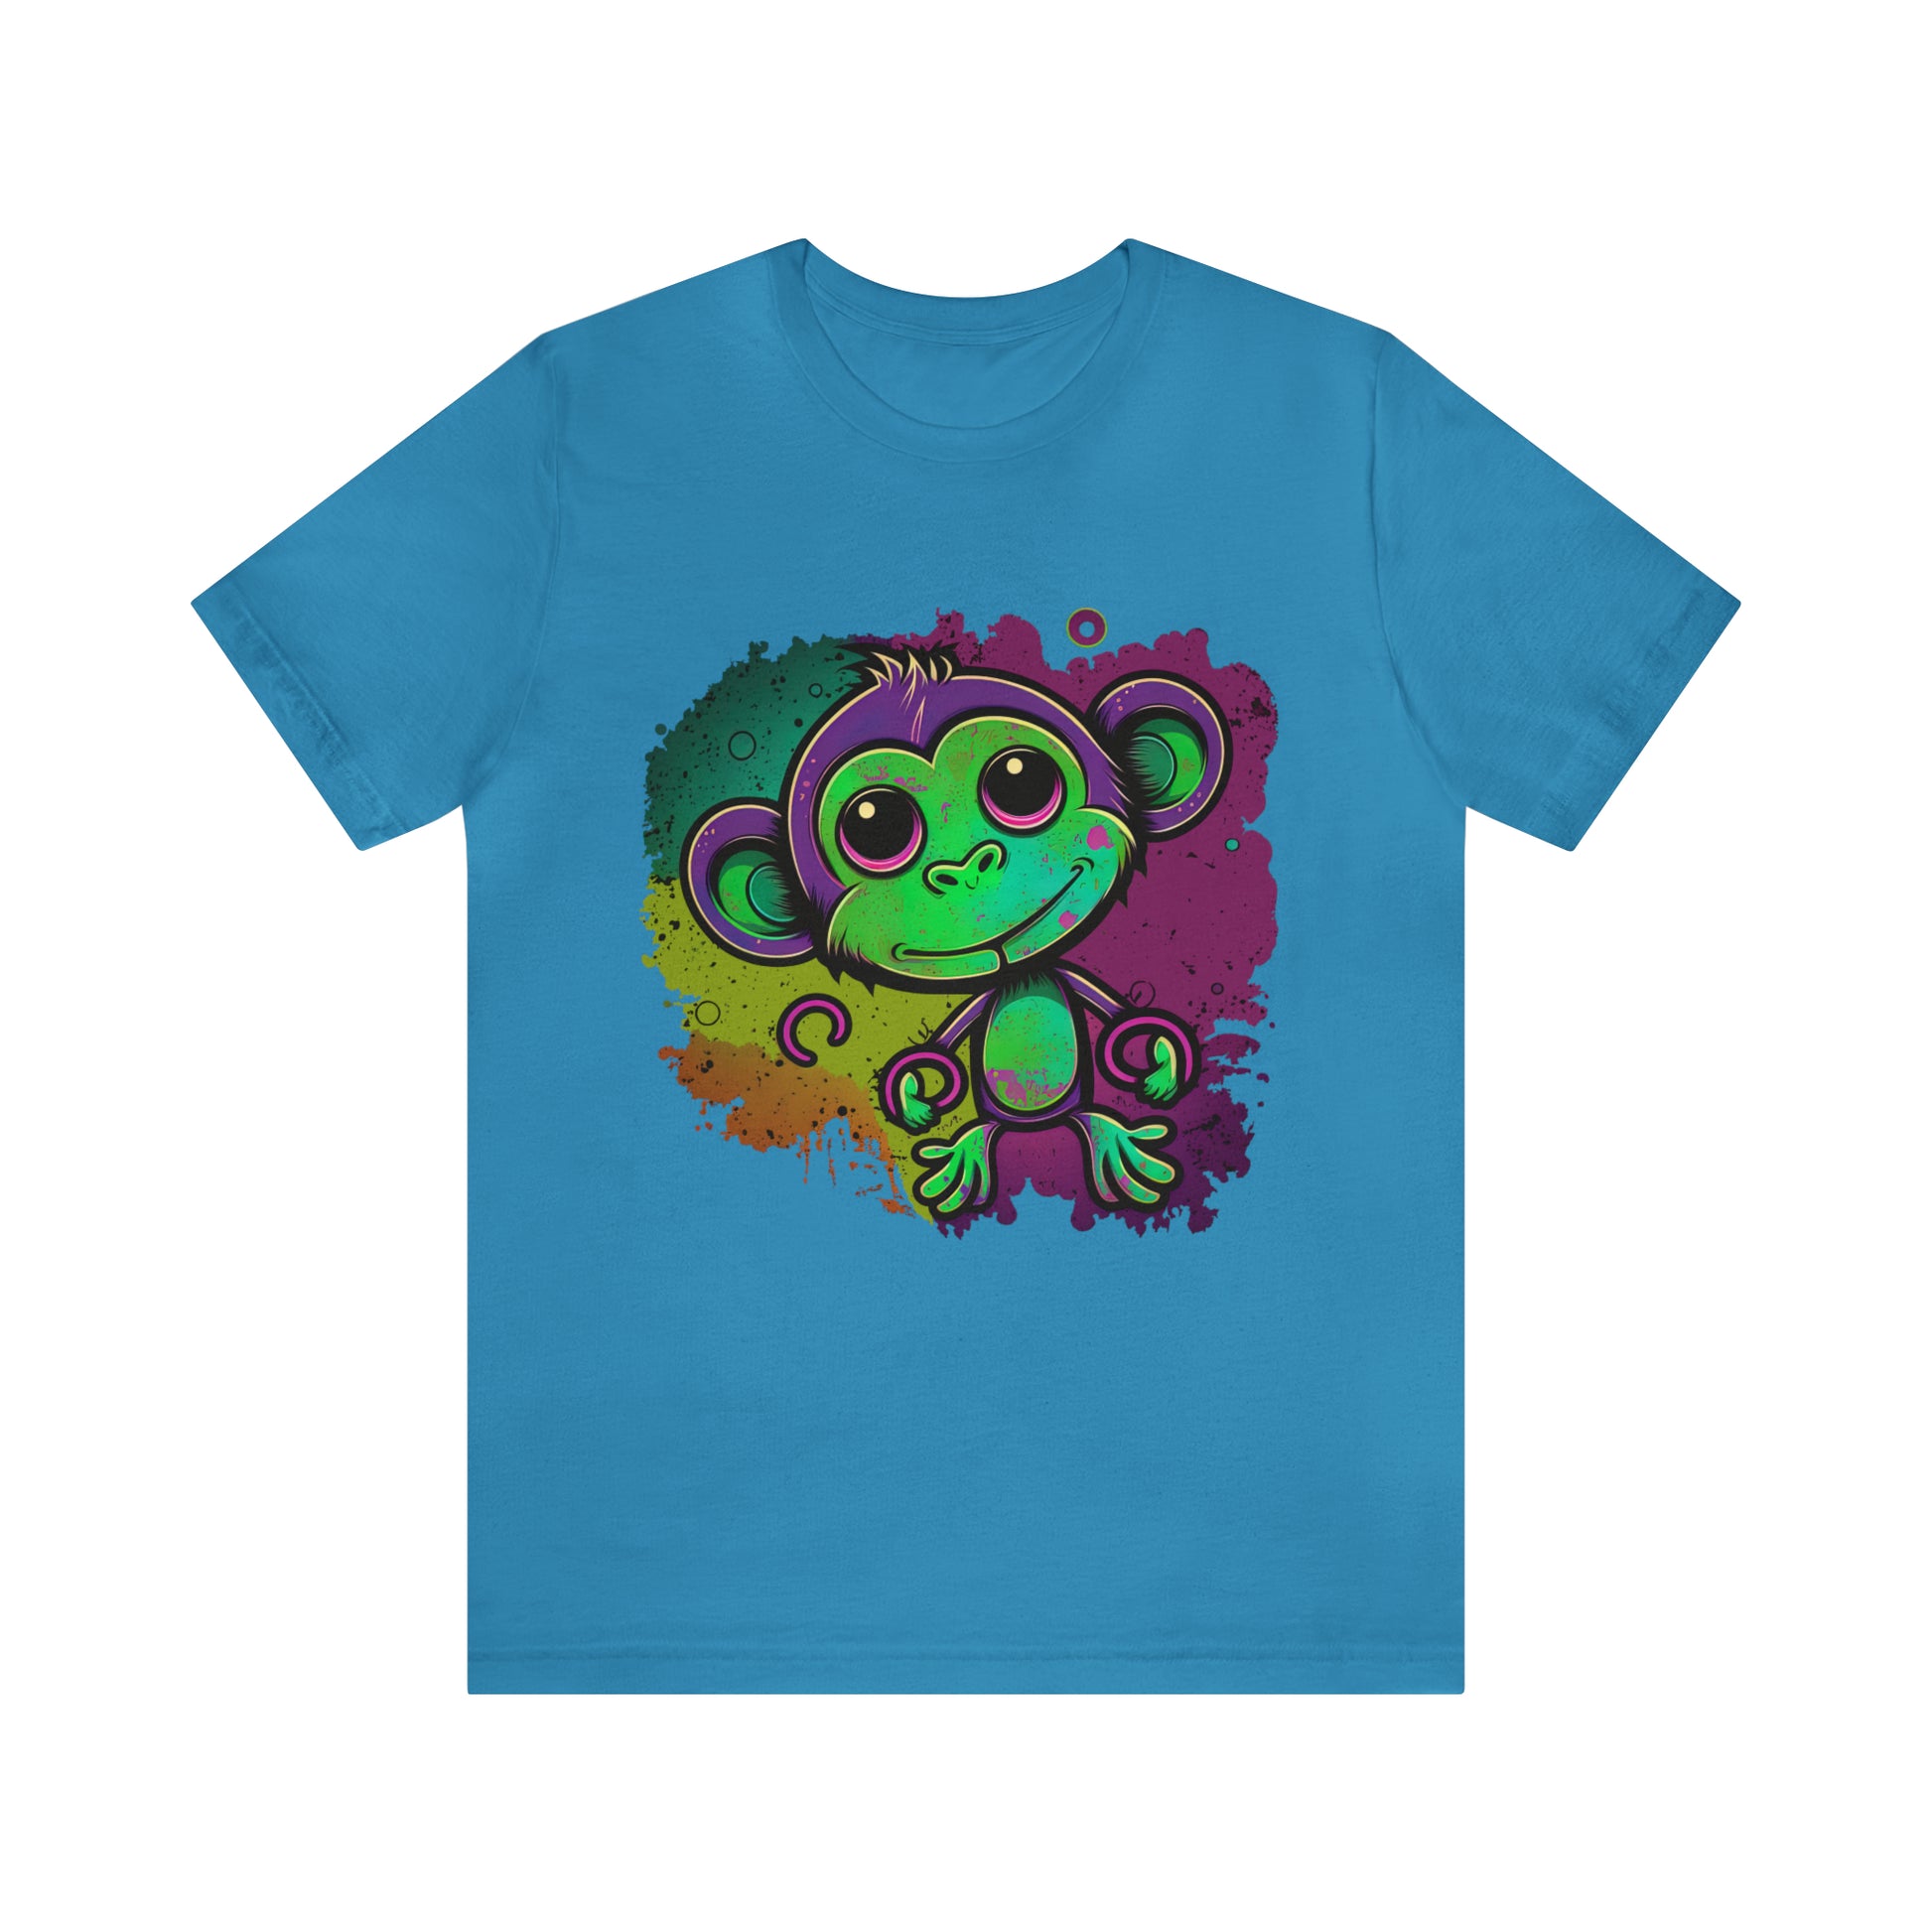 psychedelicBRANDz's Vibrant Forest Frolic featuring a monkey in a psychedelic design on an aqua shirt